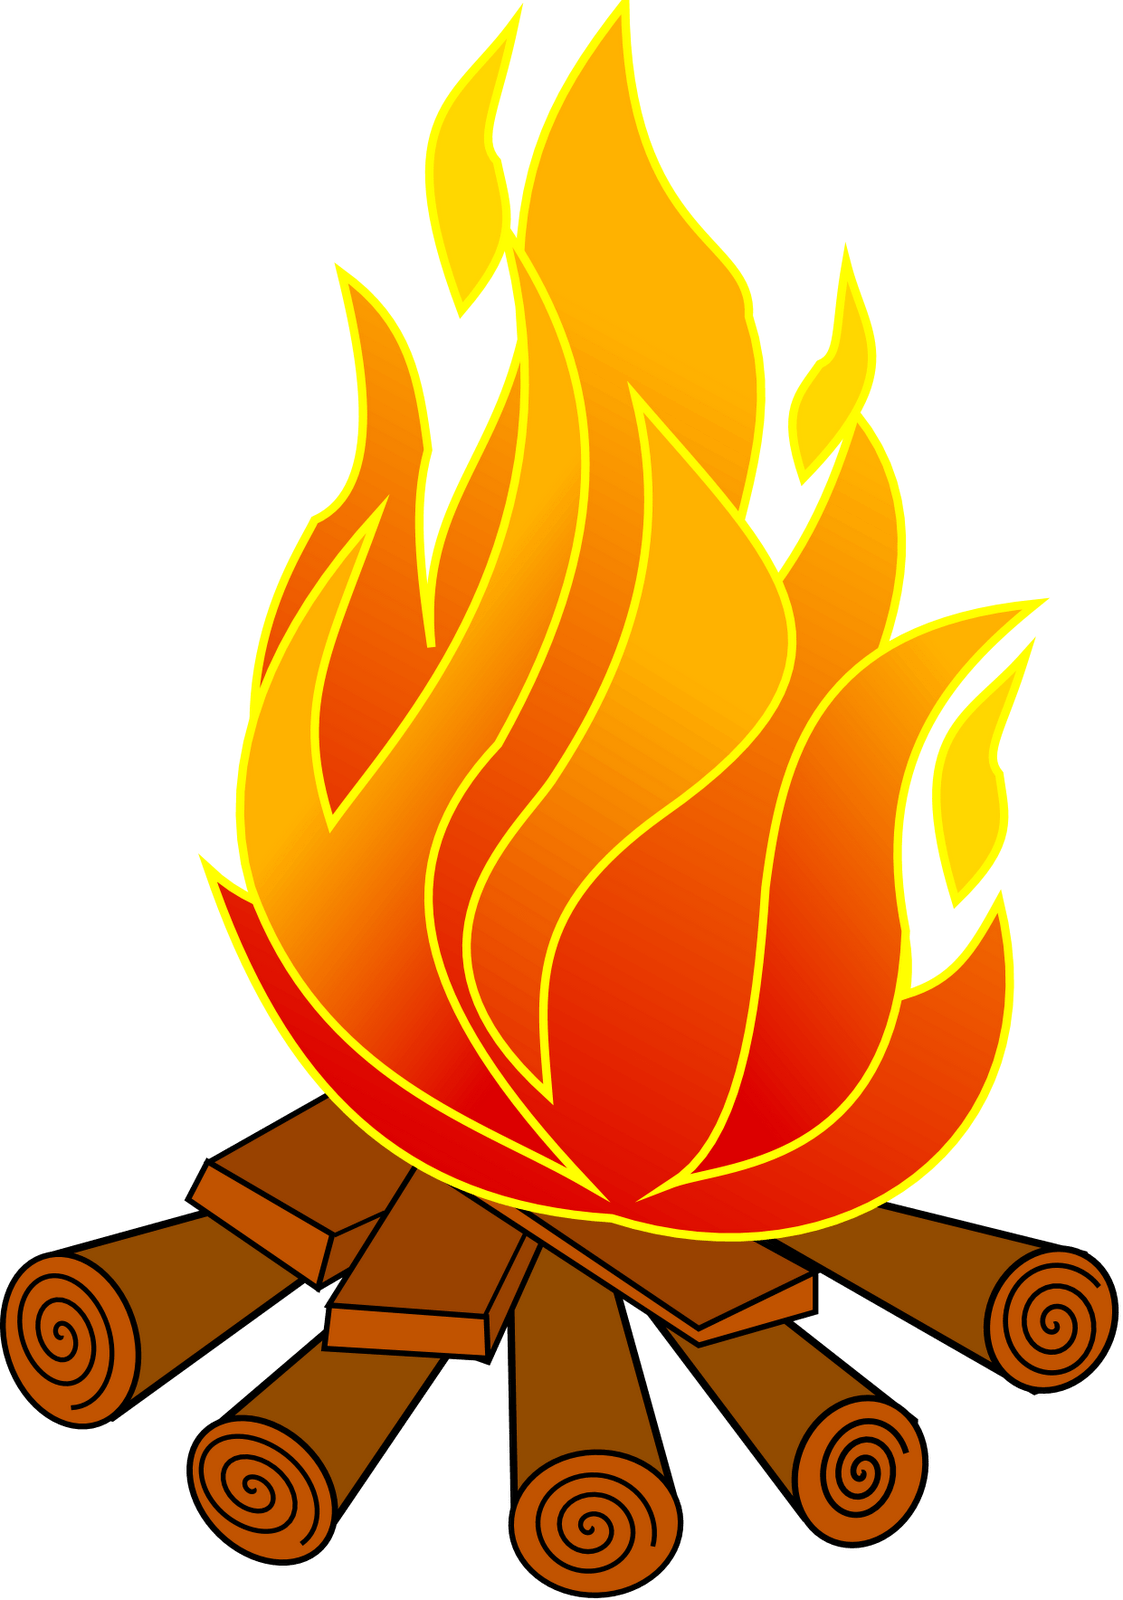 Fire clipart volcano. Torch interesting hand holding